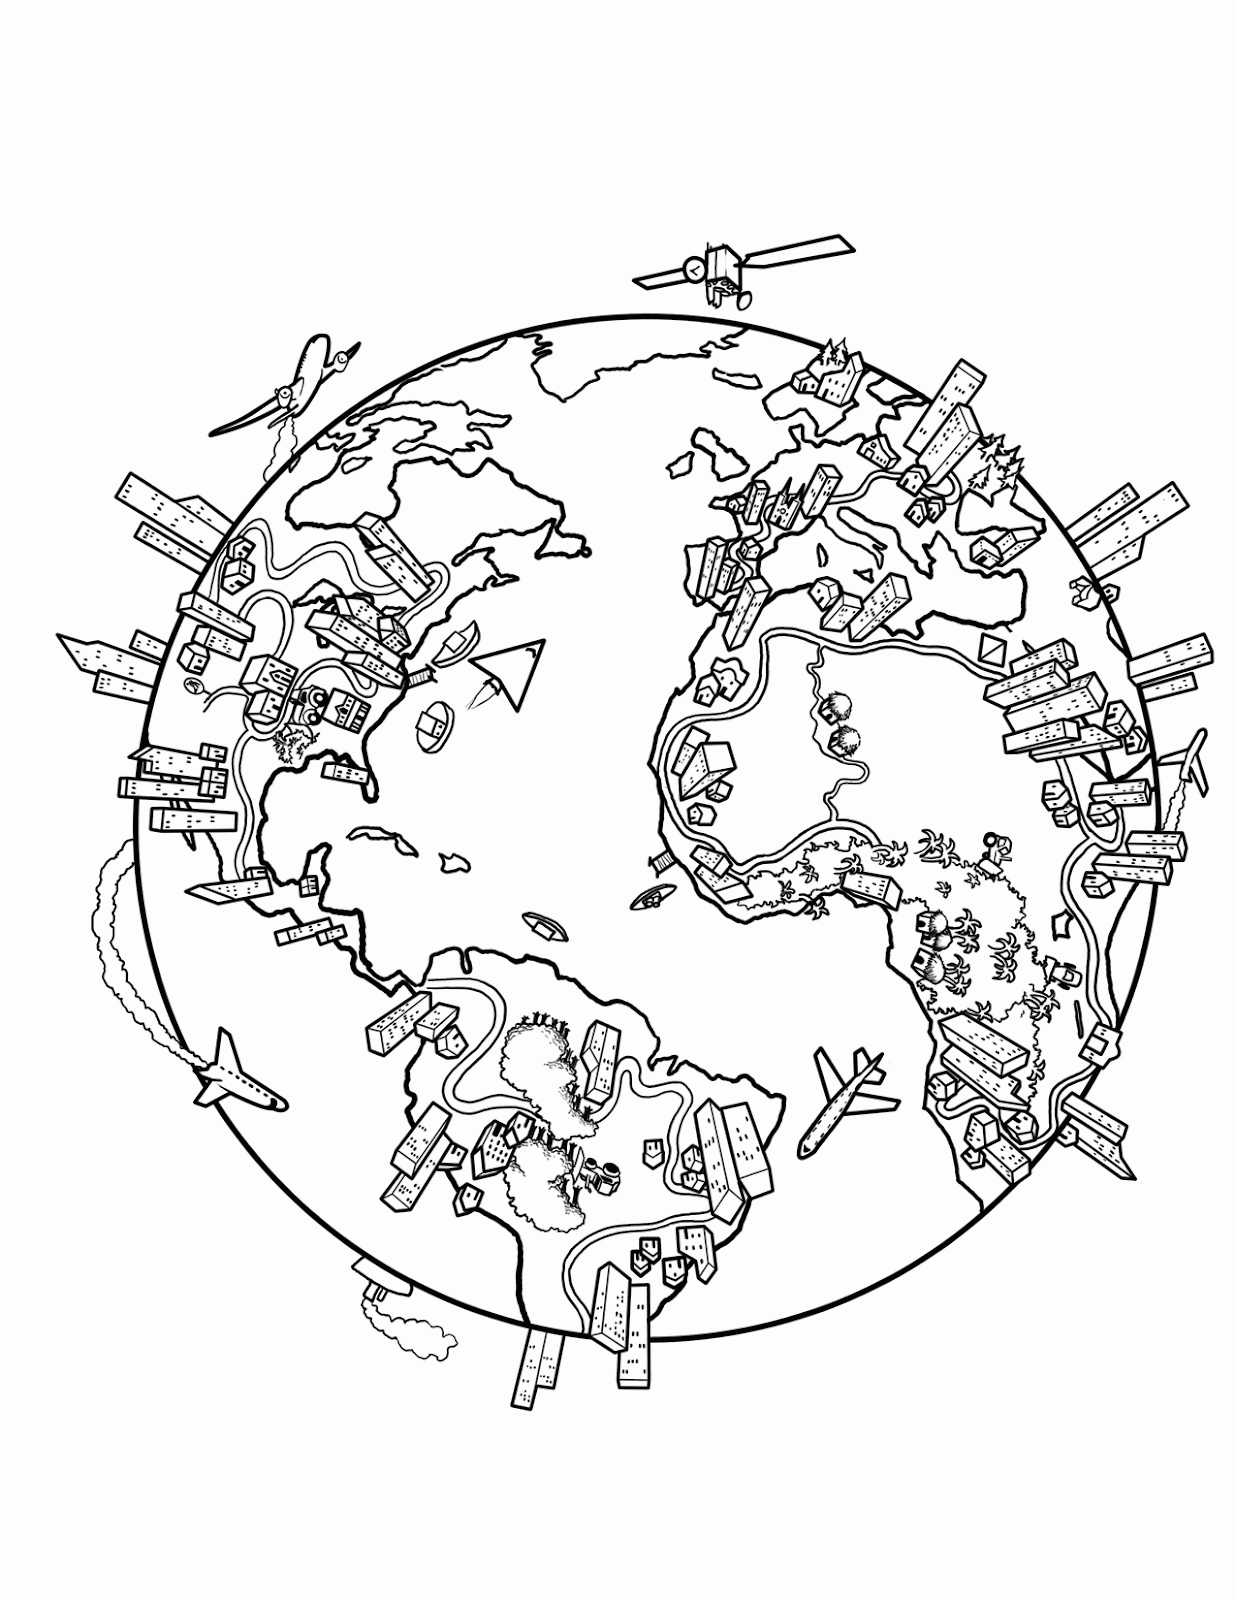 Map Of The World Coloring Page For